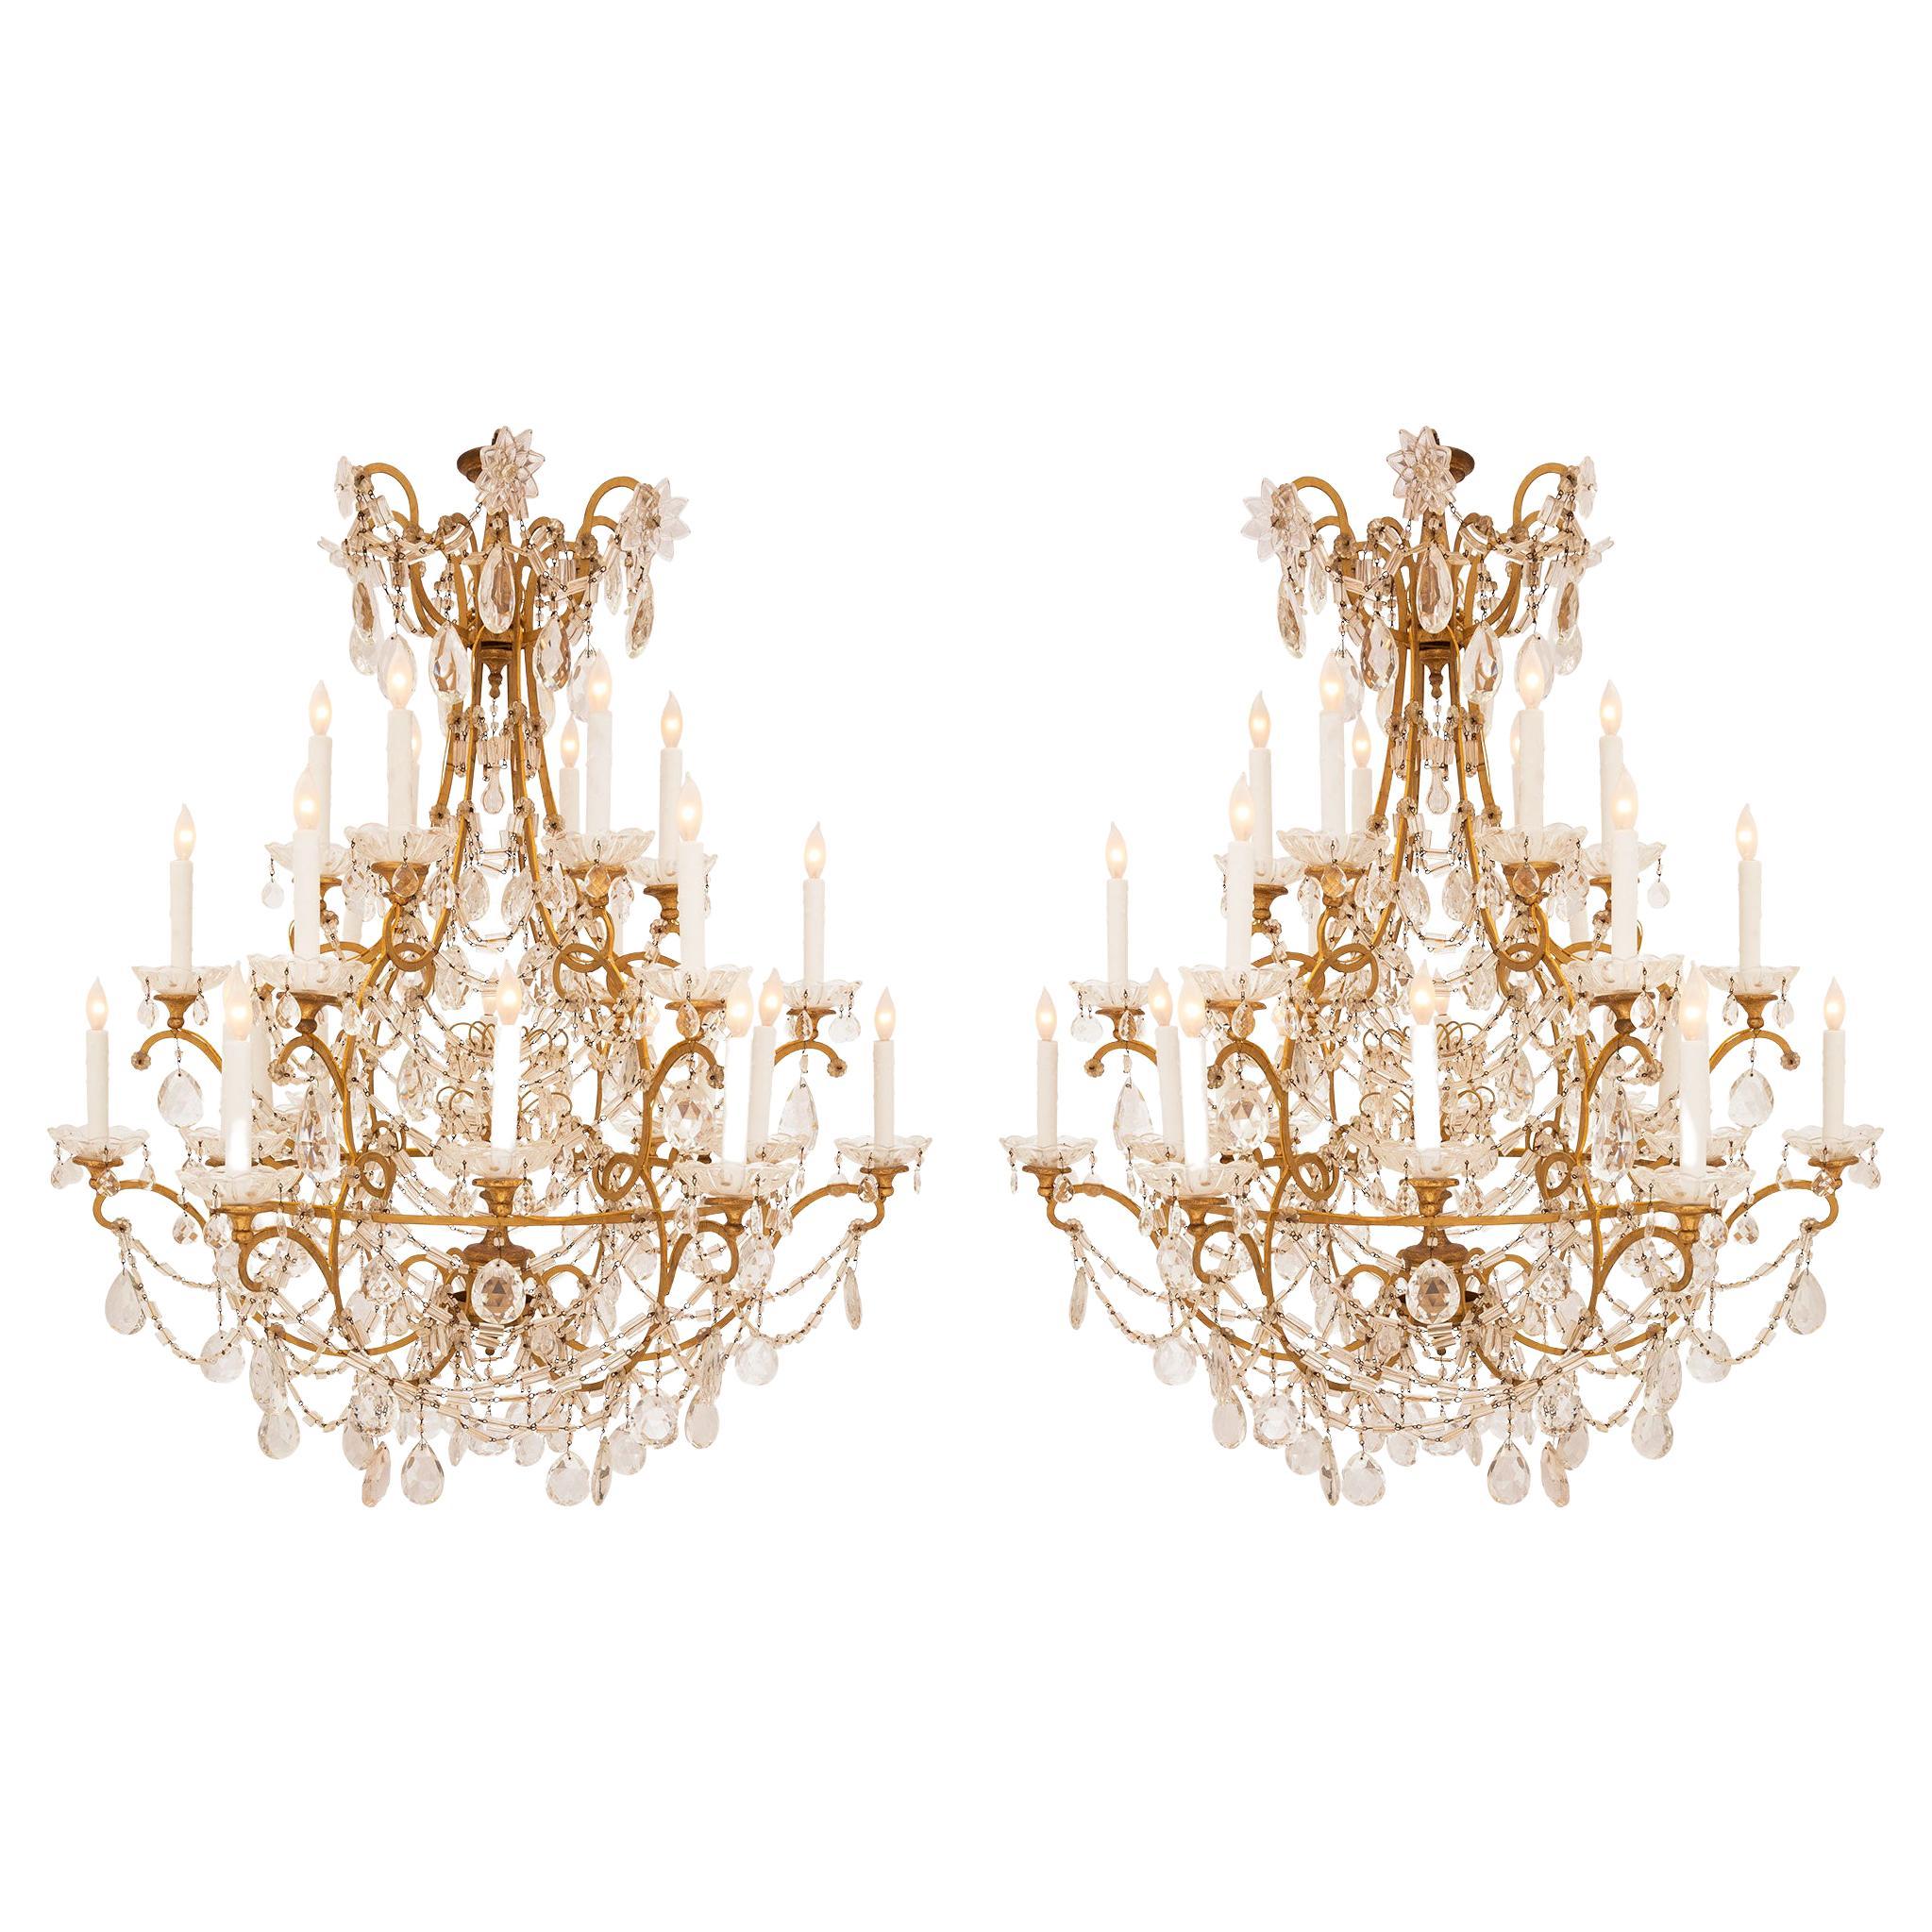 Pair of Italian 19th Century Louis XV St. Chandeliers For Sale